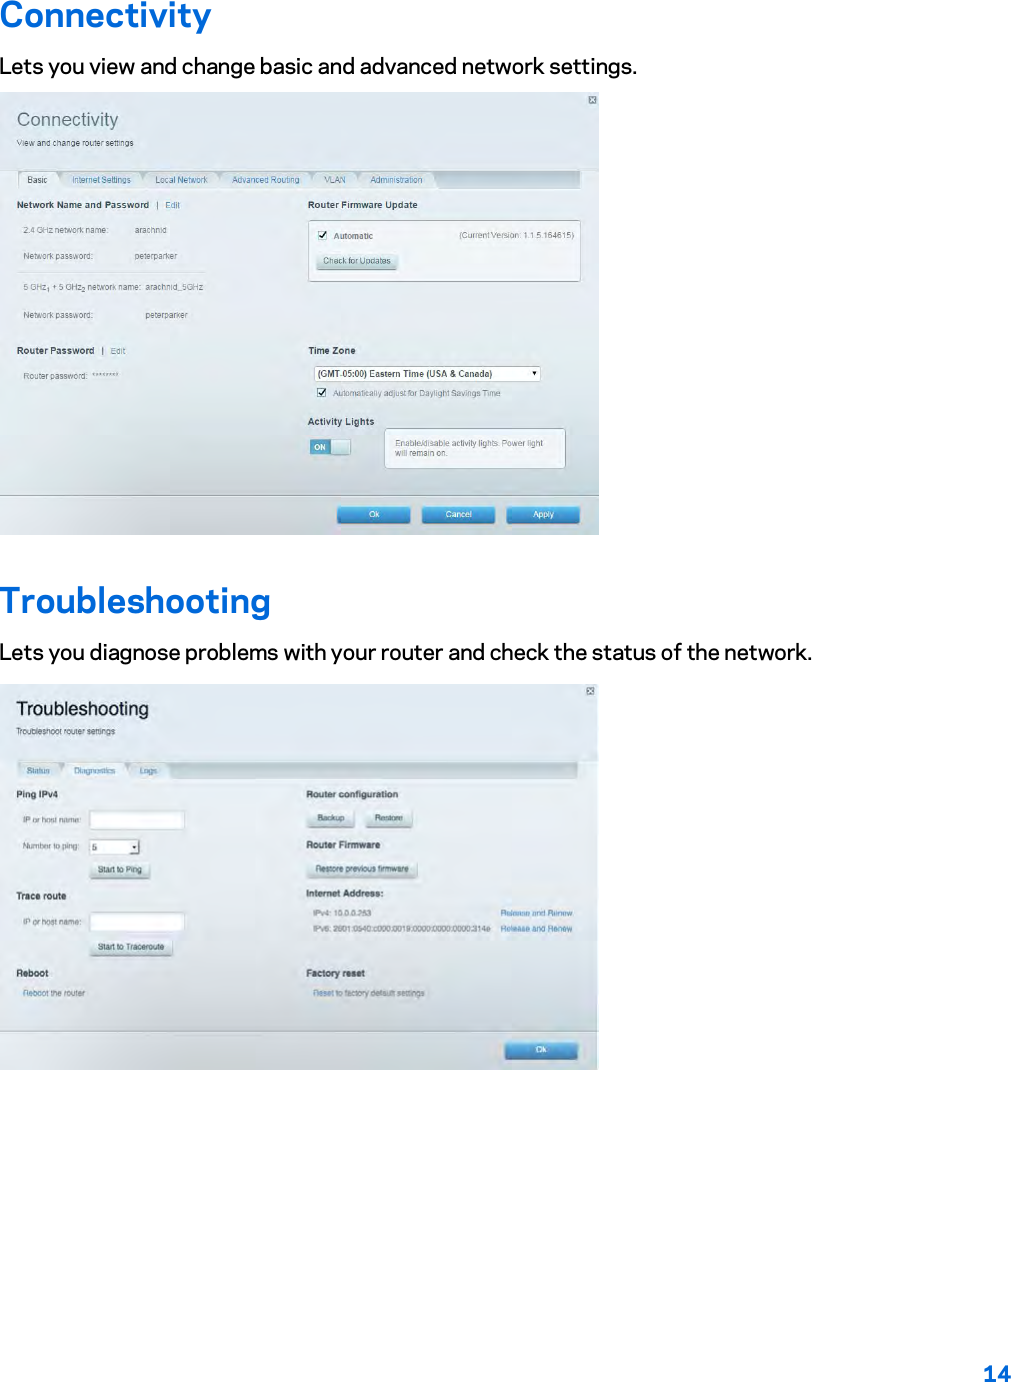 14 Connectivity Lets you view and change basic and advanced network settings. Troubleshooting Lets you diagnose problems with your router and check the status of the network. 